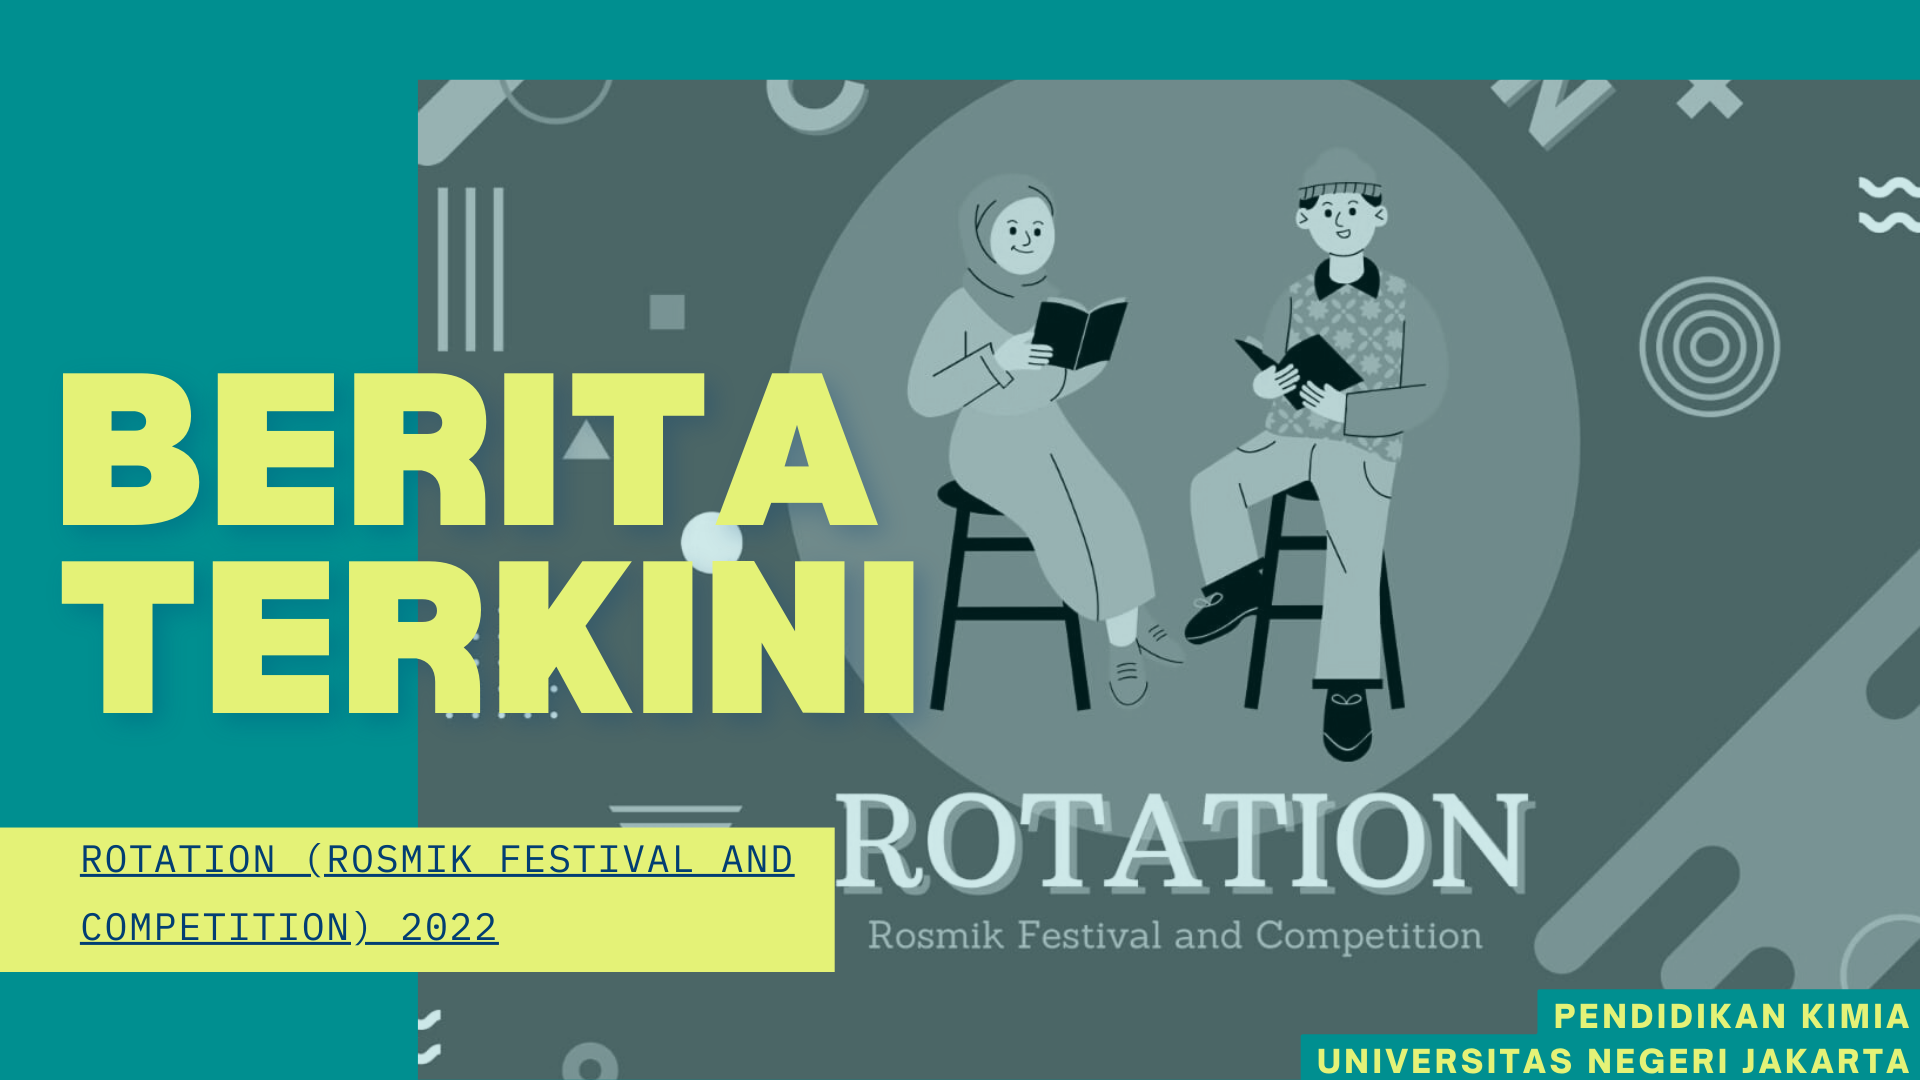 ROTATION (Rosmik Festival and Competition) 2022